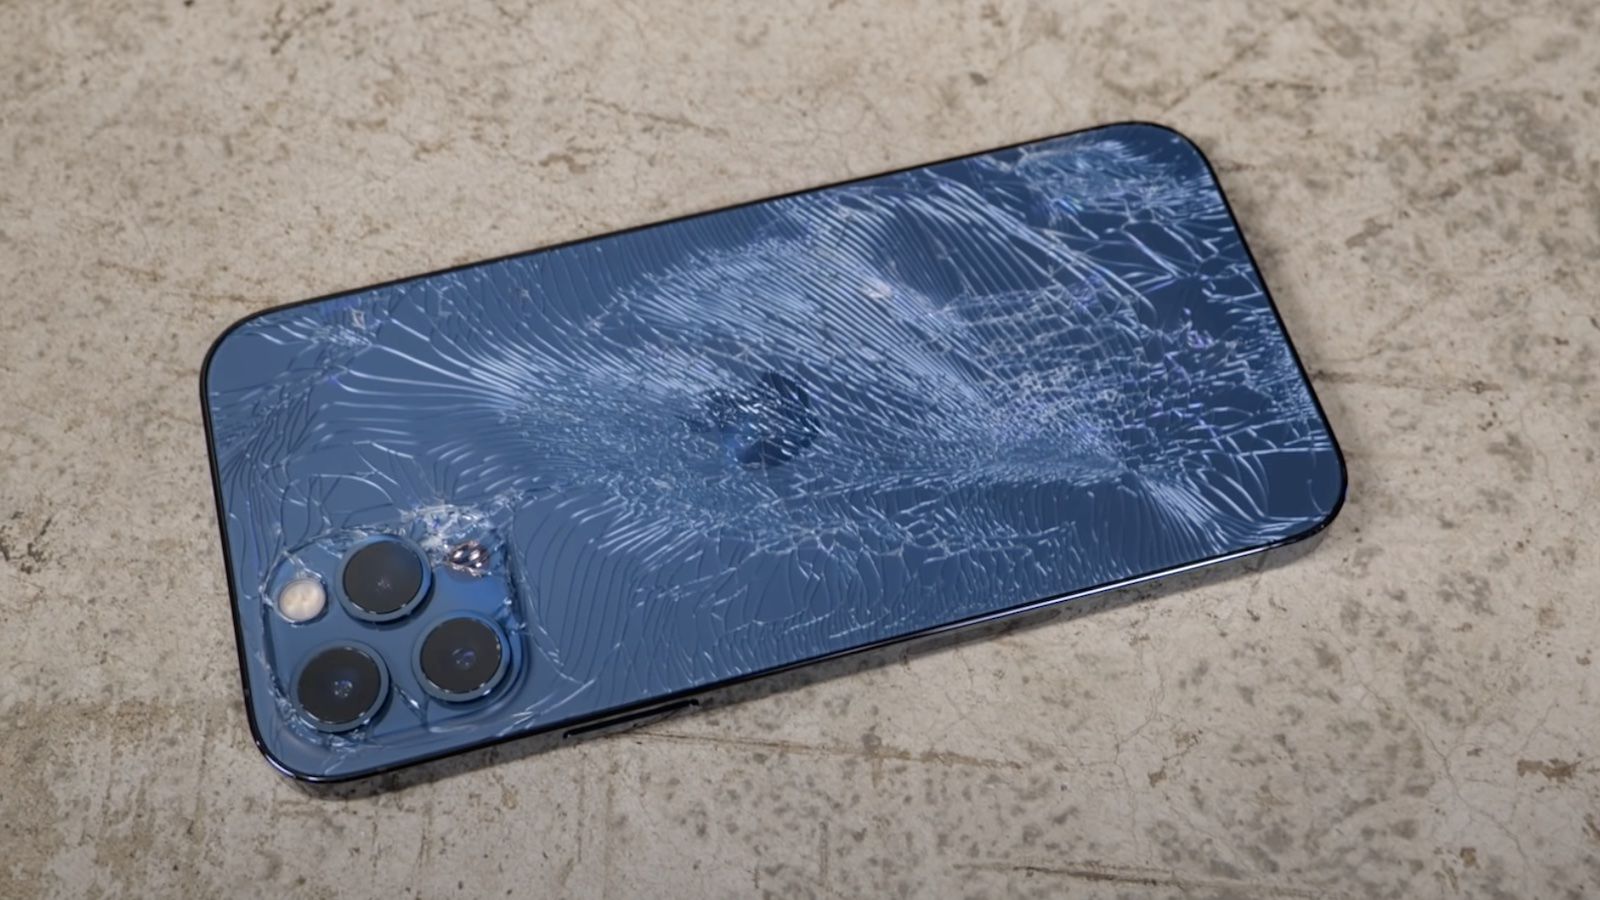 Apple can now repair a broken back glass of an iPhone 12 Pro without replacing the entire device